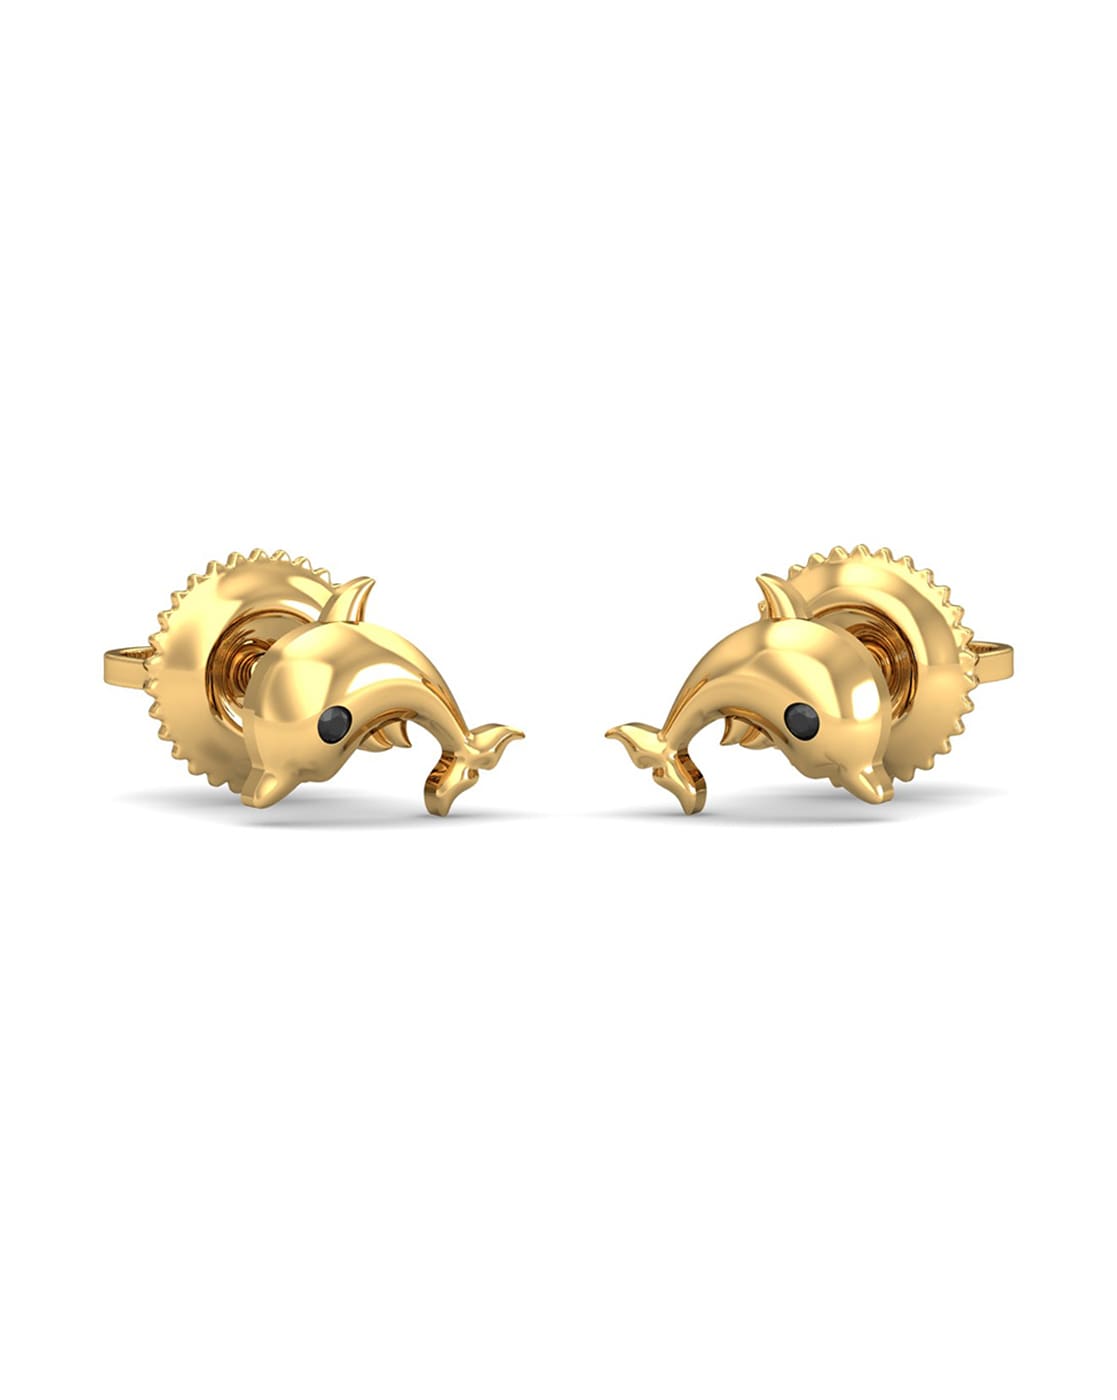 14K yellow and white gold dolphin earrings